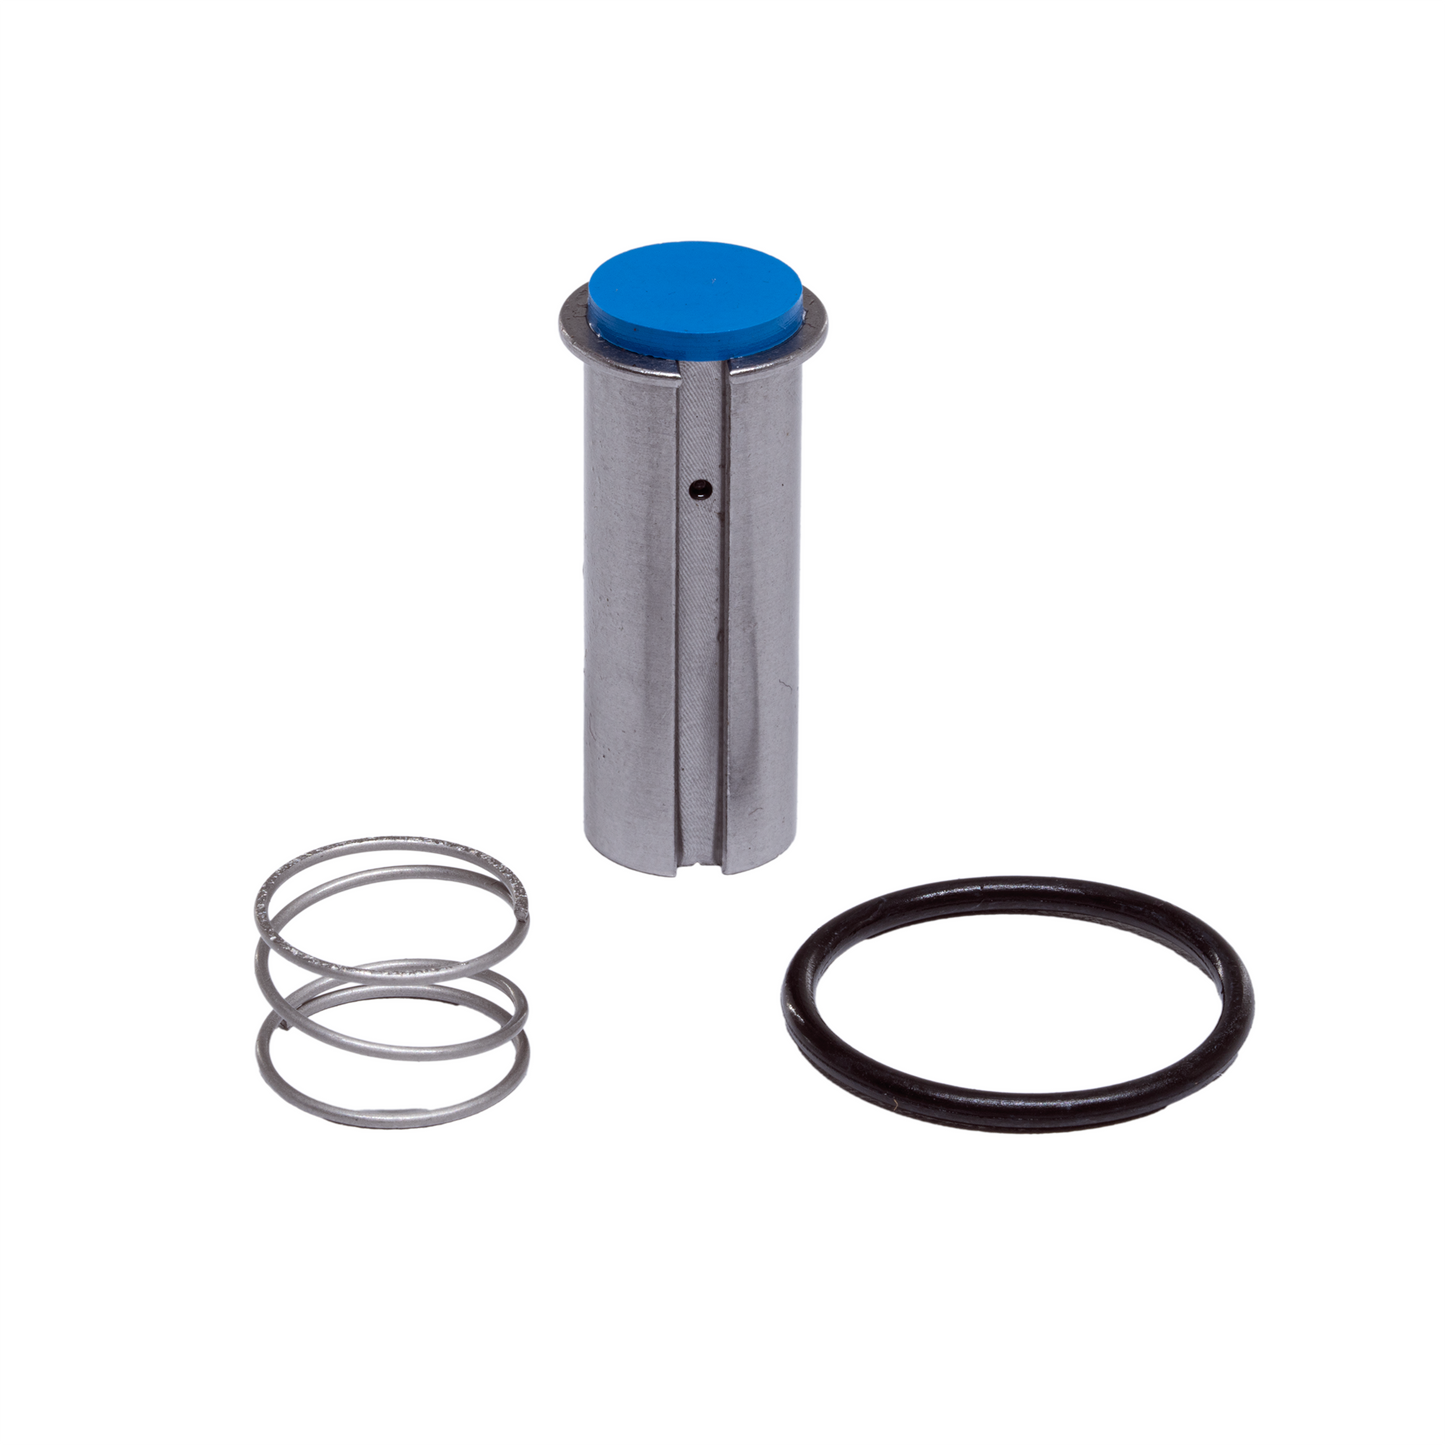 .310 High Pressure Alcohol Fuel Solenoid Rebuild Kit - Piston / Spring / O-Ring / Solenoid Wrench